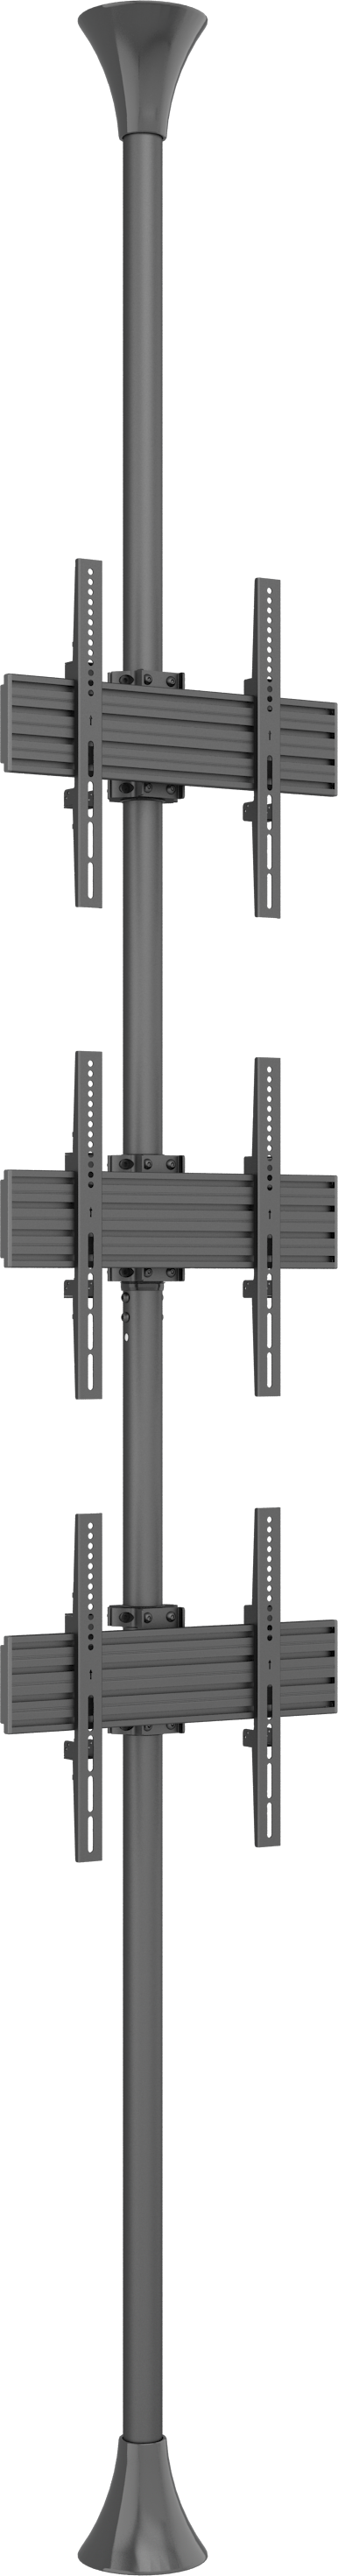 Three-Screen Single-Pole Floor-to-Ceiling Mount (Top-to-bottom)